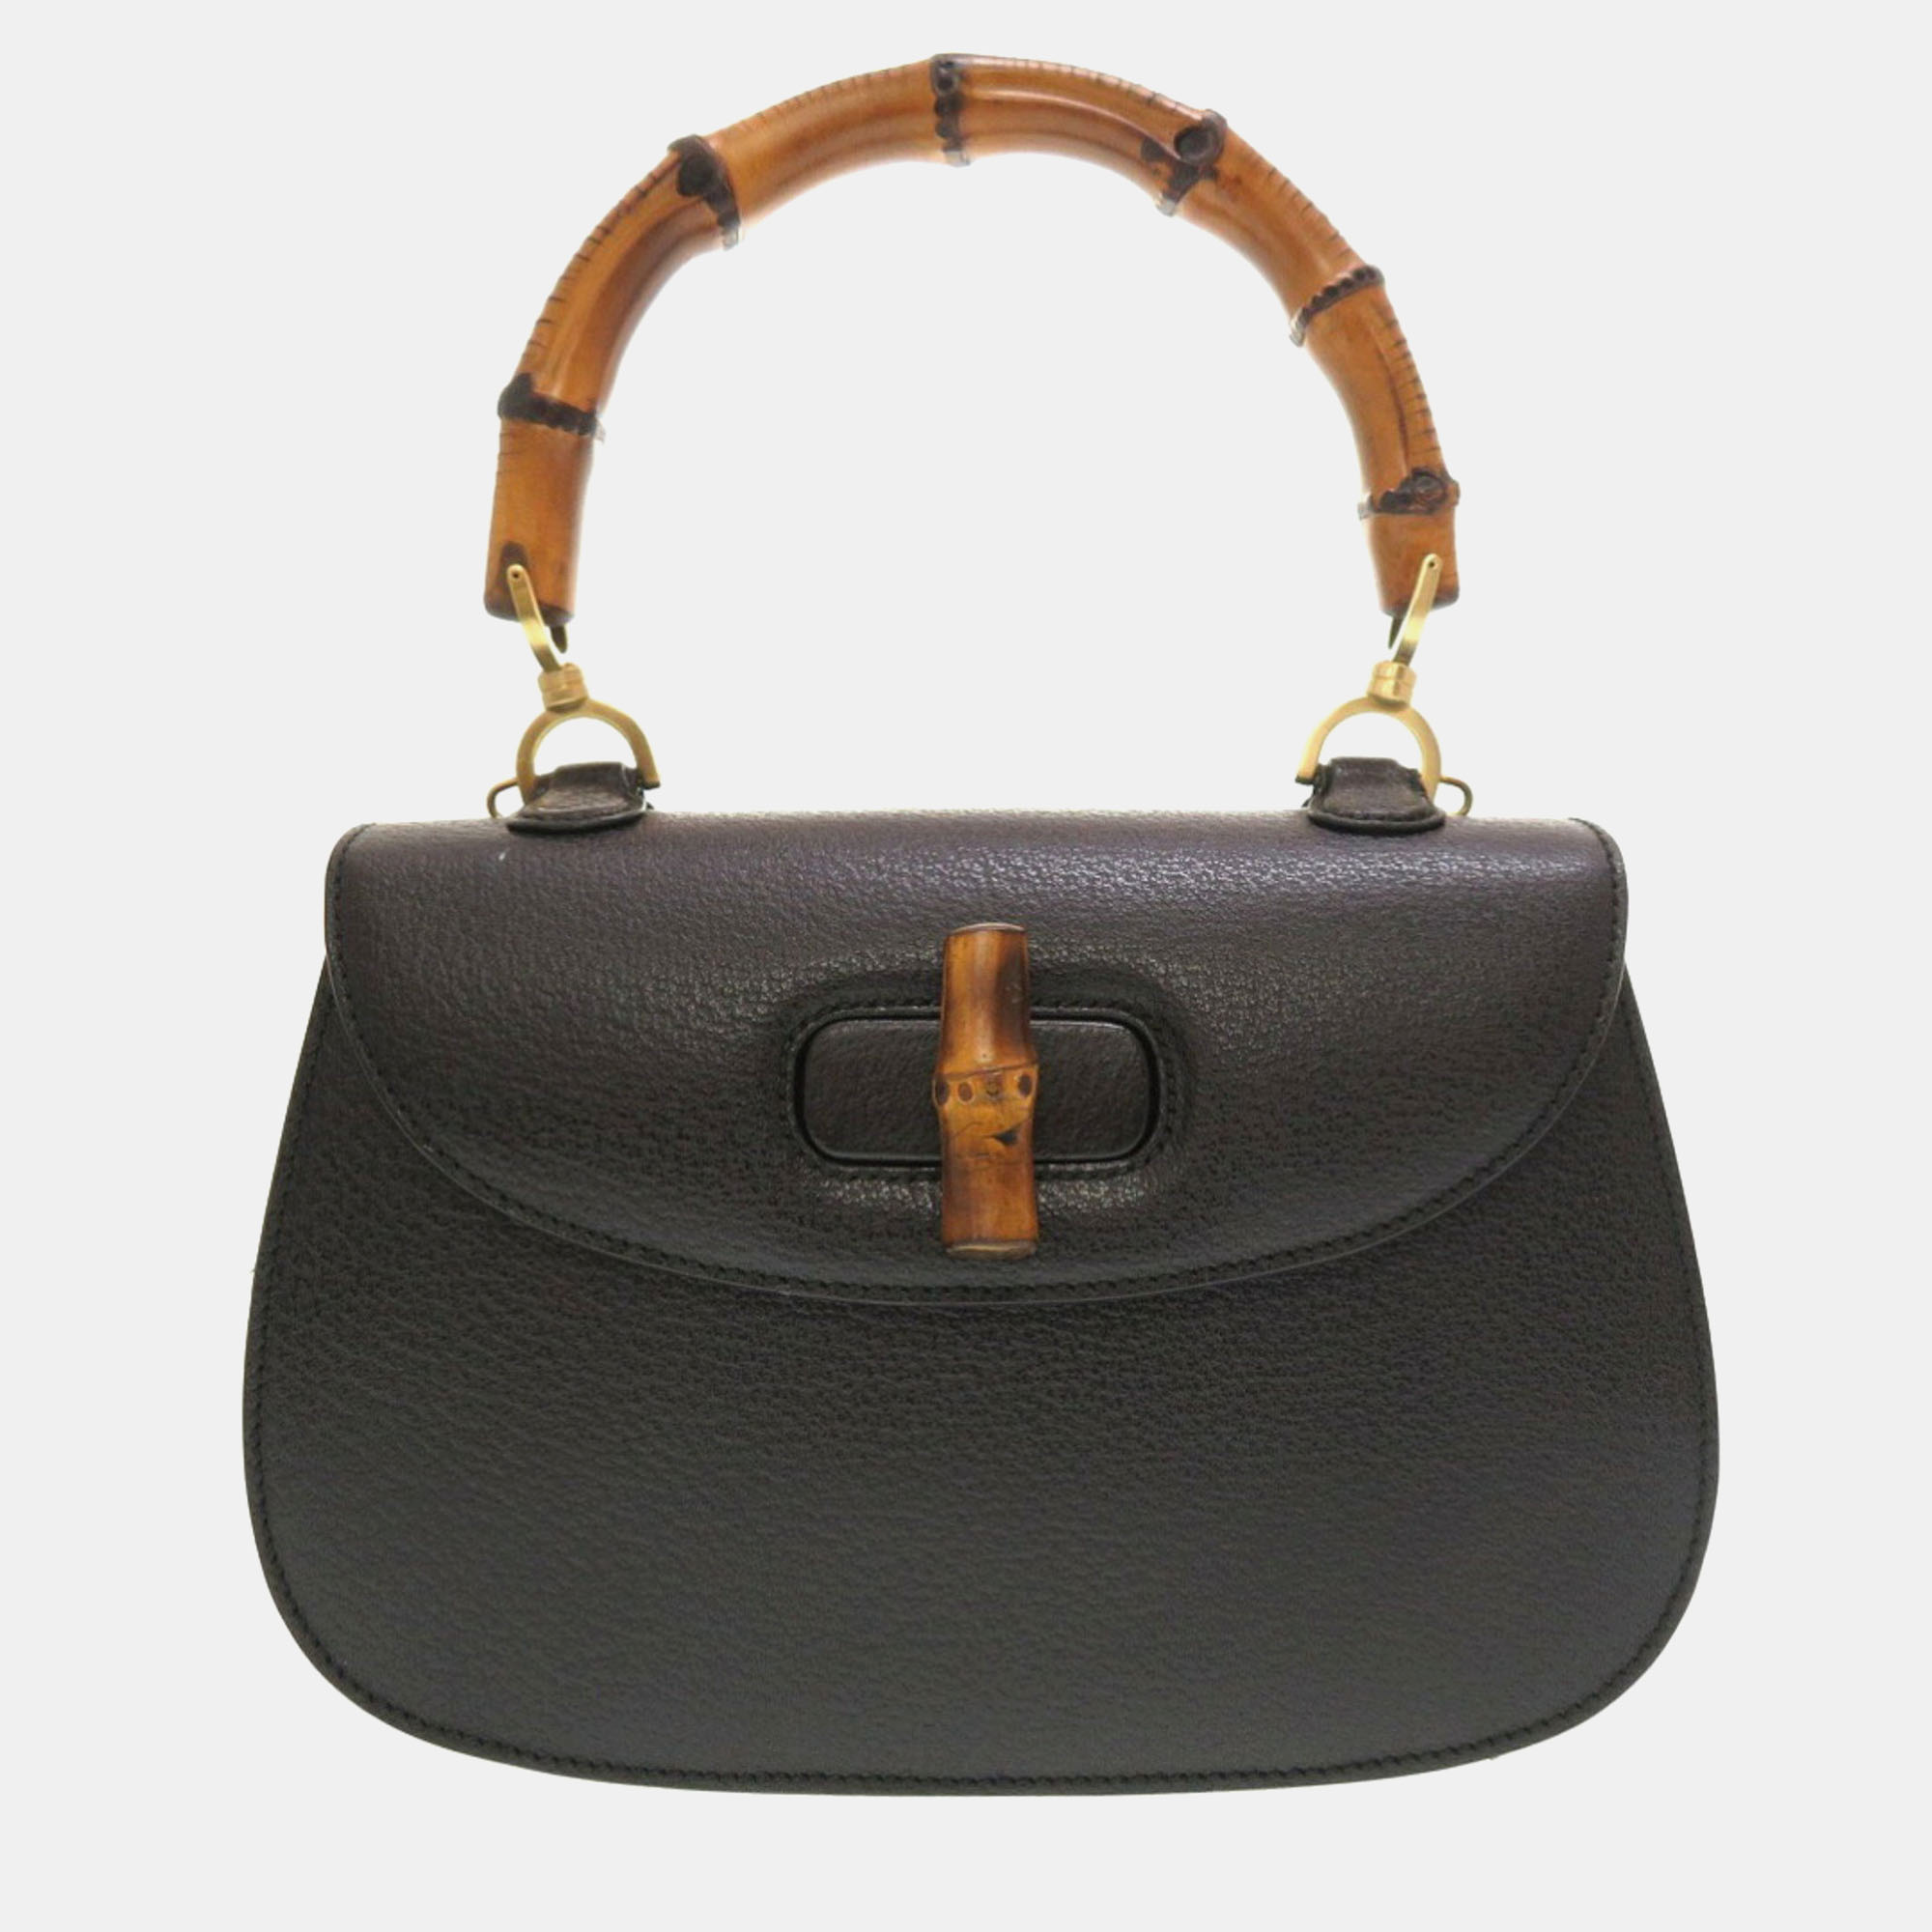 Gucci black leather bamboo 1947 top handle bag